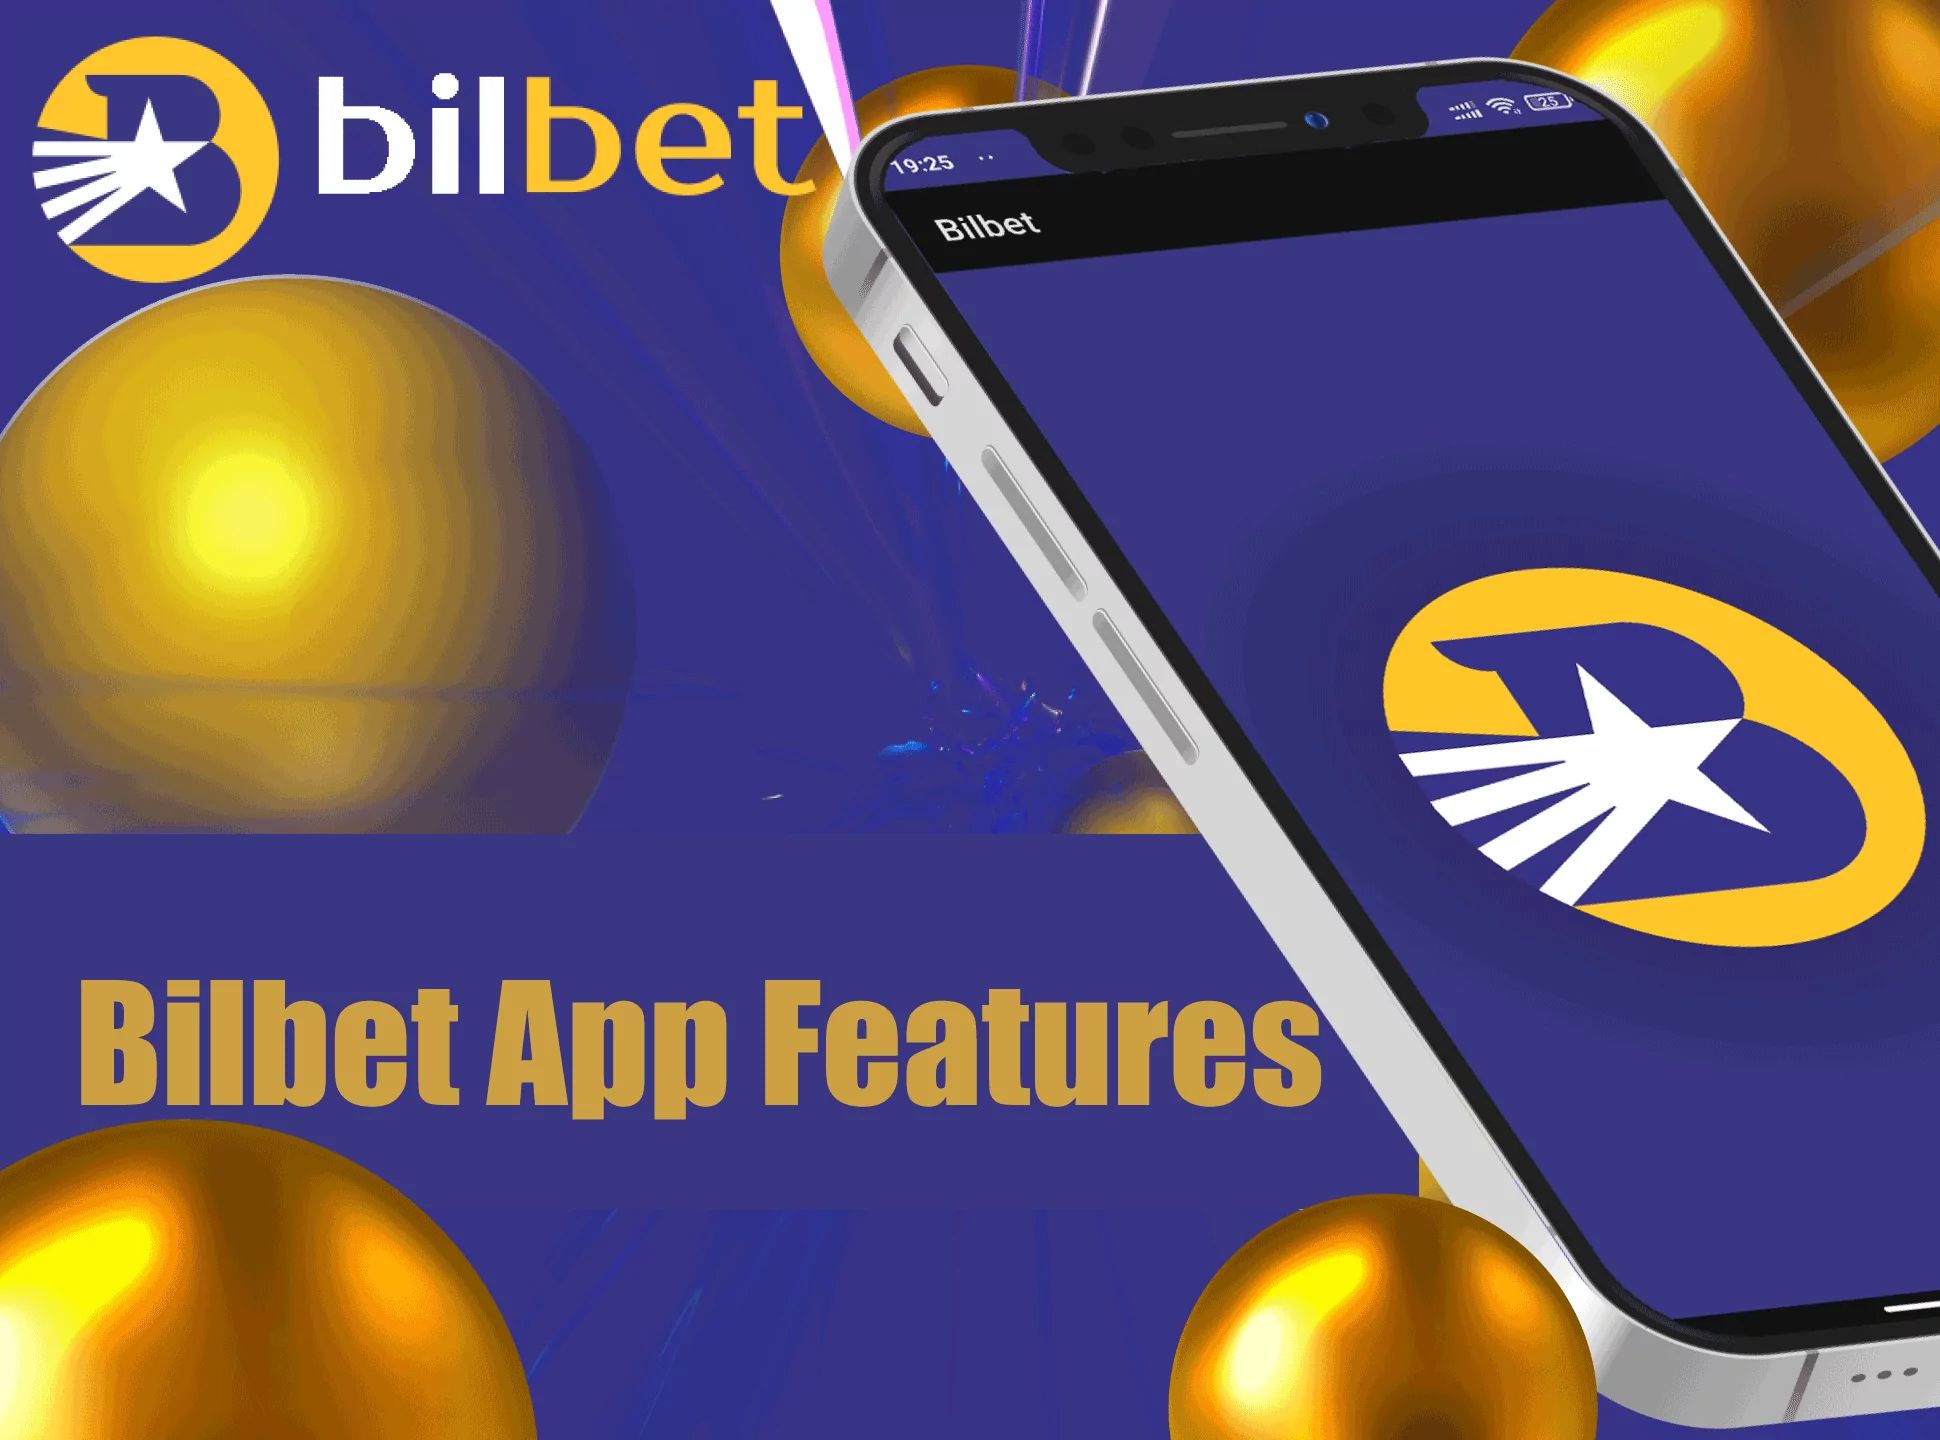 Bilbet has lots of useful features that make you betting even better.